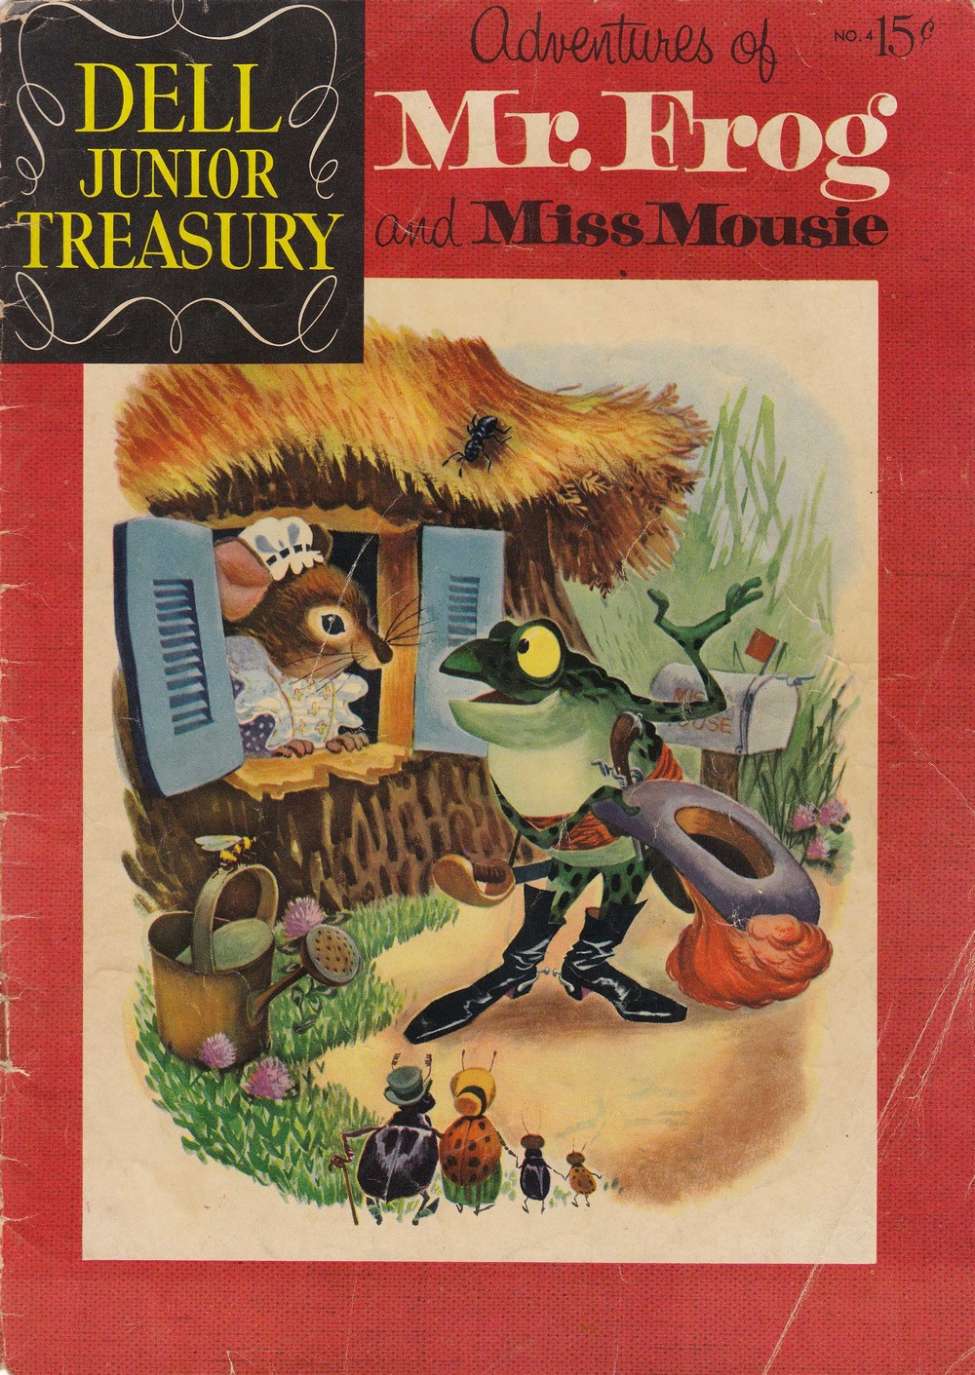 Comic Book Cover For Dell Junior Treasury 4 - Adventures of Mr. Frog and Miss Mousie